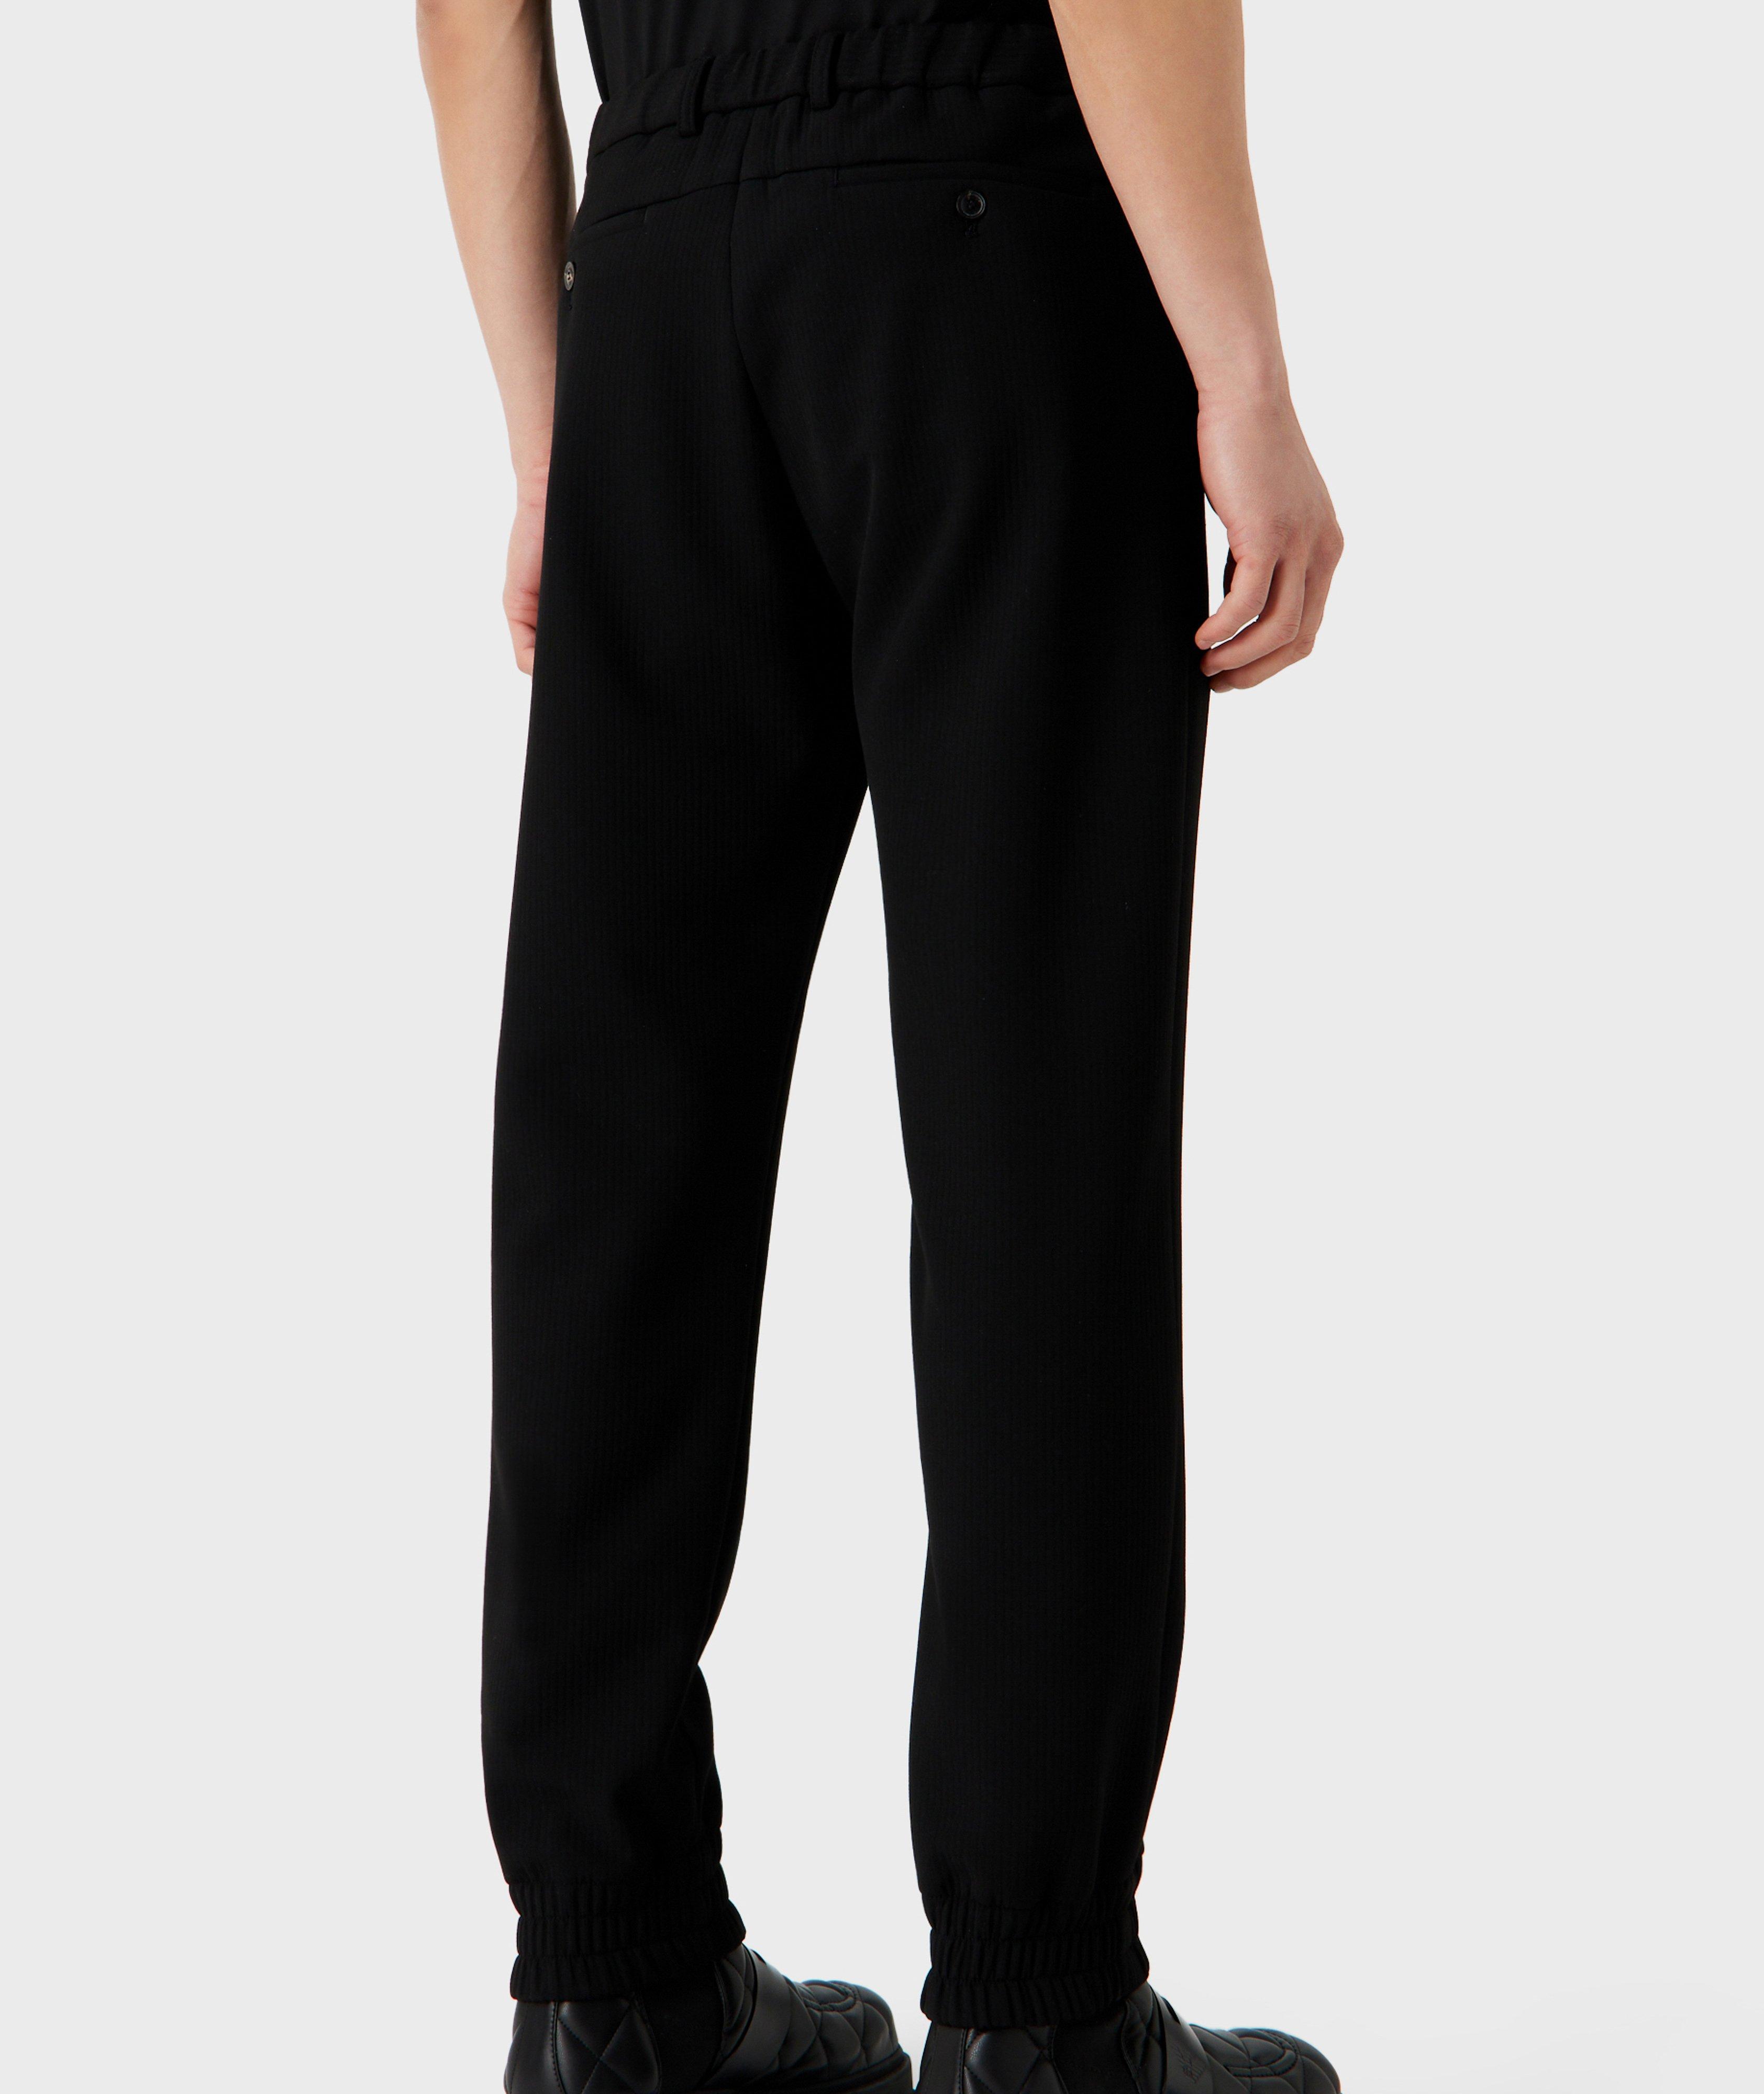 Cannette Technical Fabric Trousers image 2